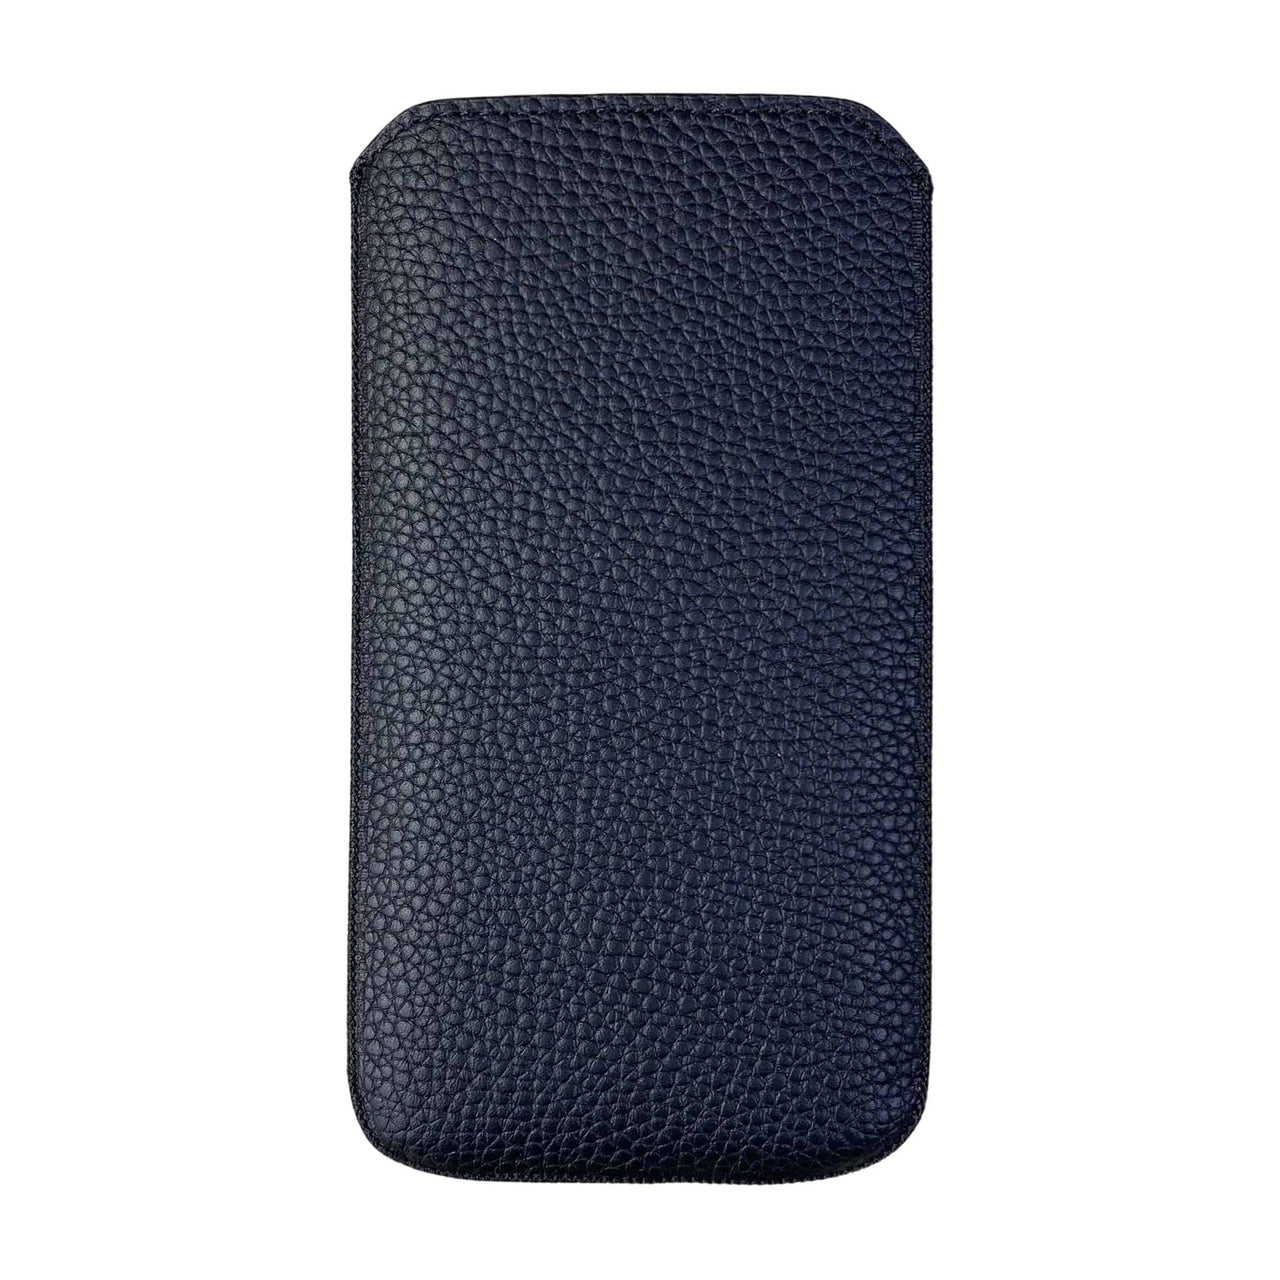 iPhone 13 Pro Max Genuine Leather Pouch Case